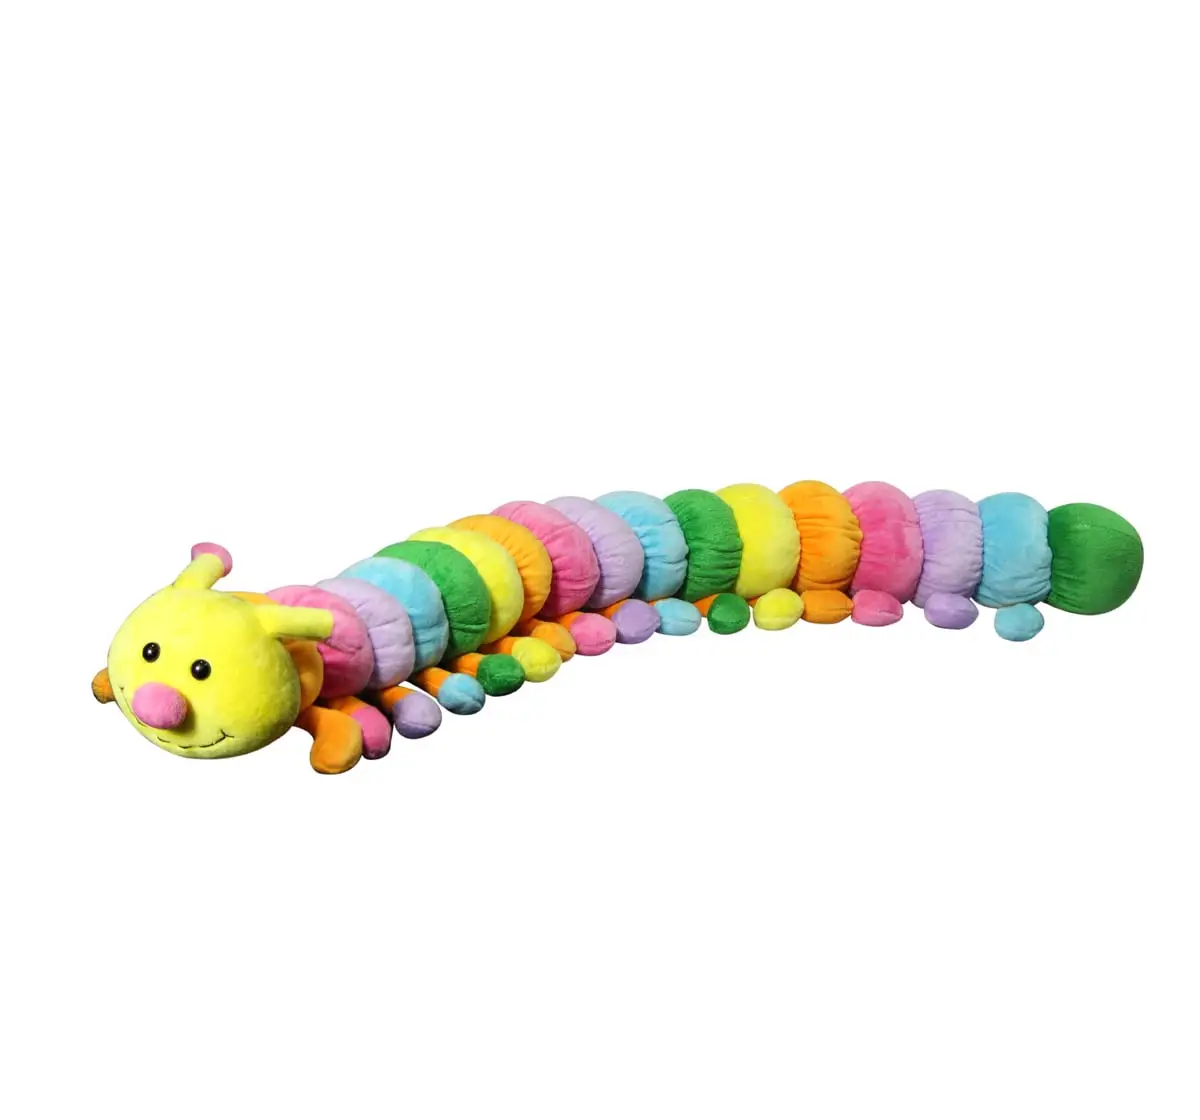 Soft Buddies New Caterpillar, Quirky Soft Toys for Kids age 12M+ 11.43 Cm 